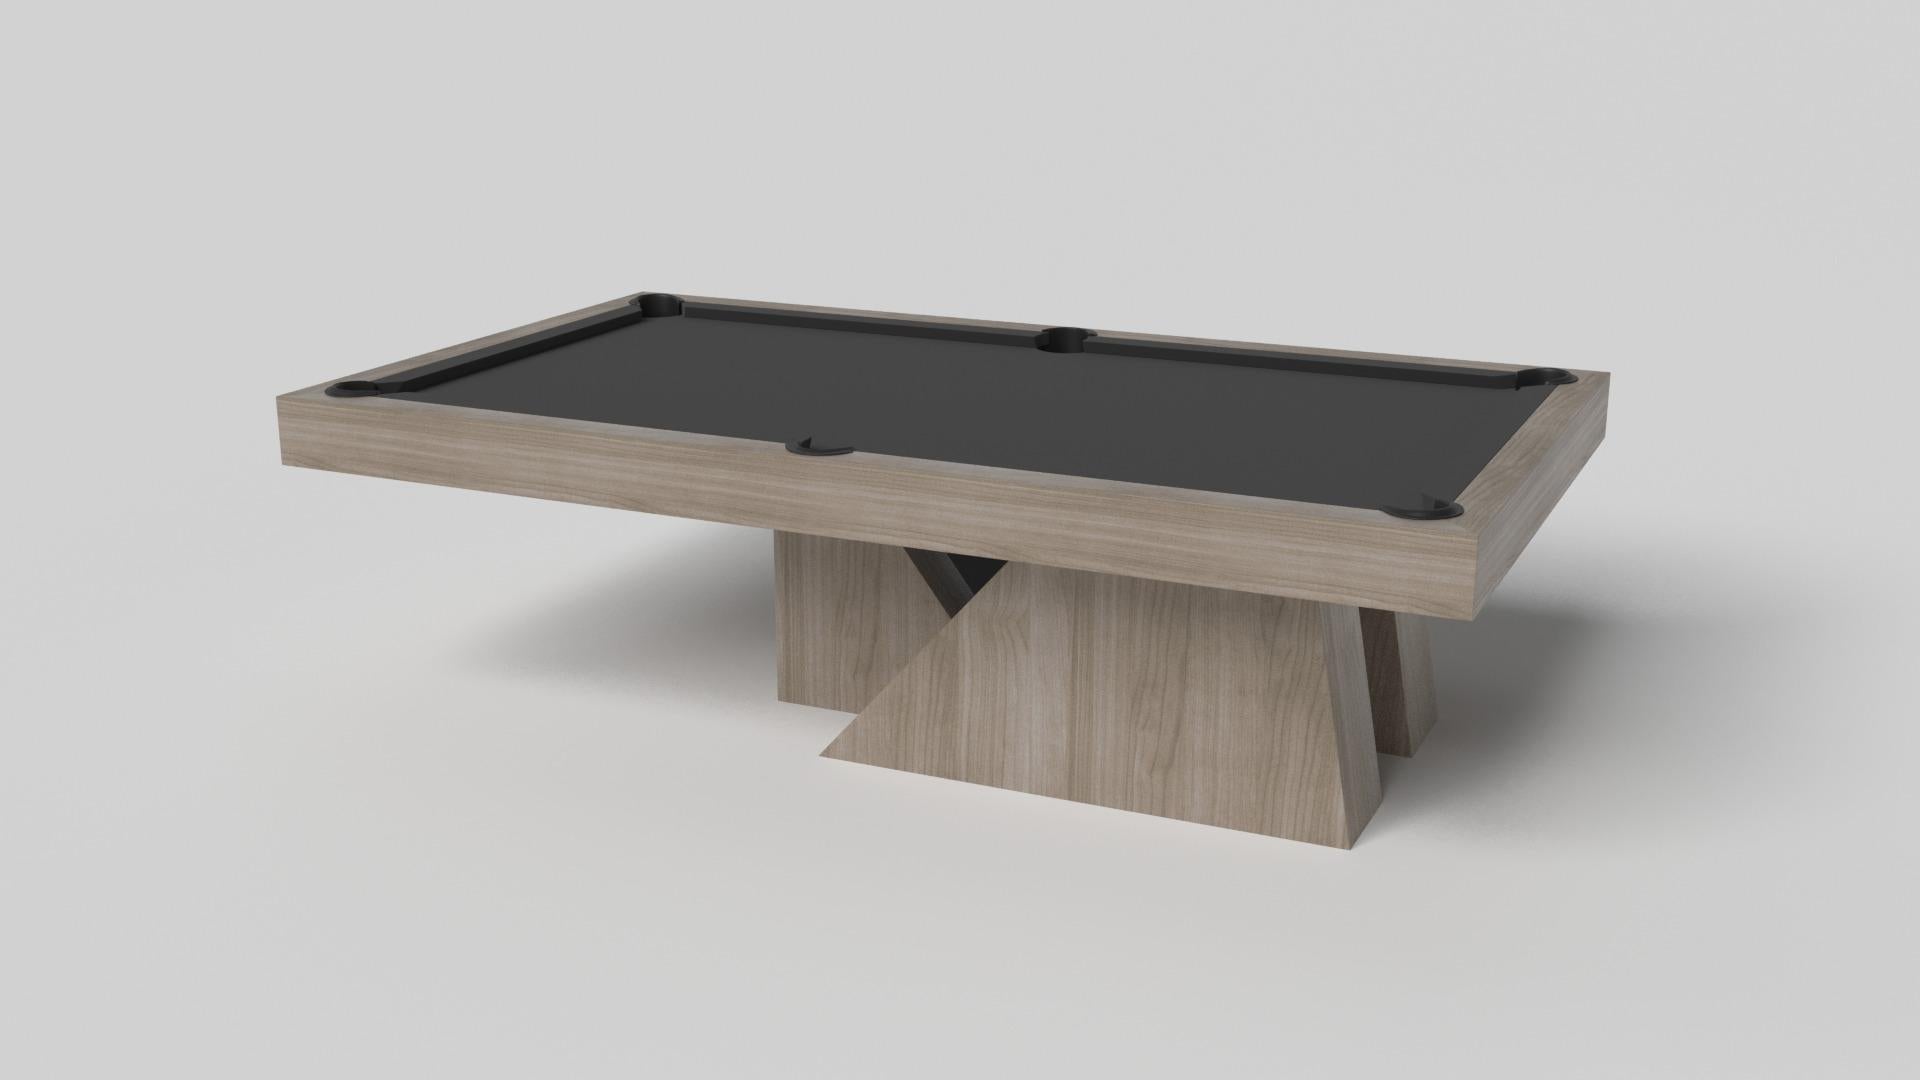 An asymmetric base creates a free-floating silhouette, making the Stilt pool table in chrome with walnut a compelling, contemporary addition to the modern home. Crafted from durable metal with solid walnut wood accents, this luxury handcrafted game